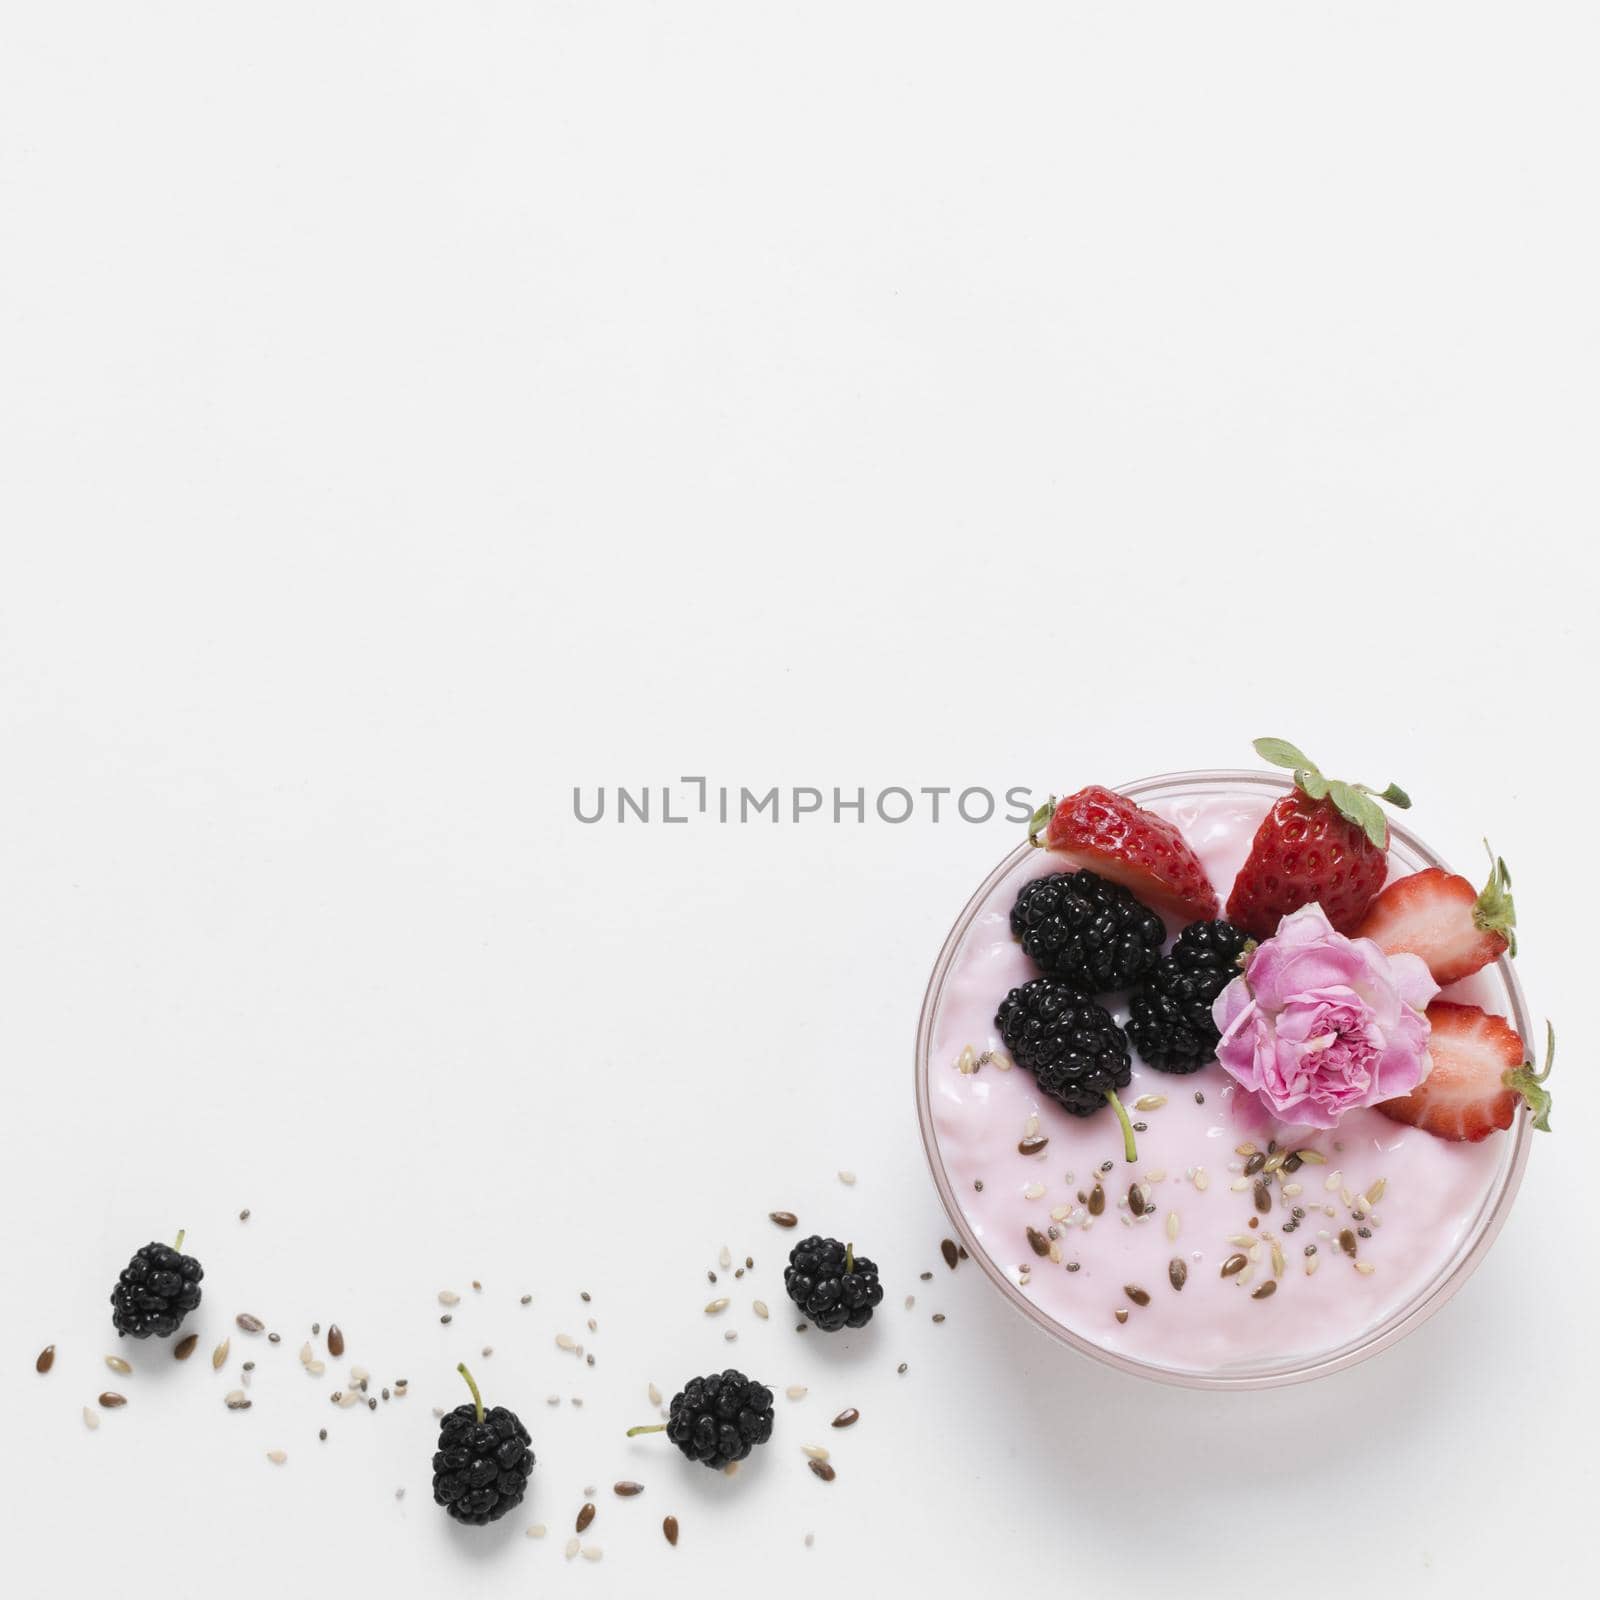 flat lay fruit yoghurt with rose. High quality beautiful photo concept by Zahard